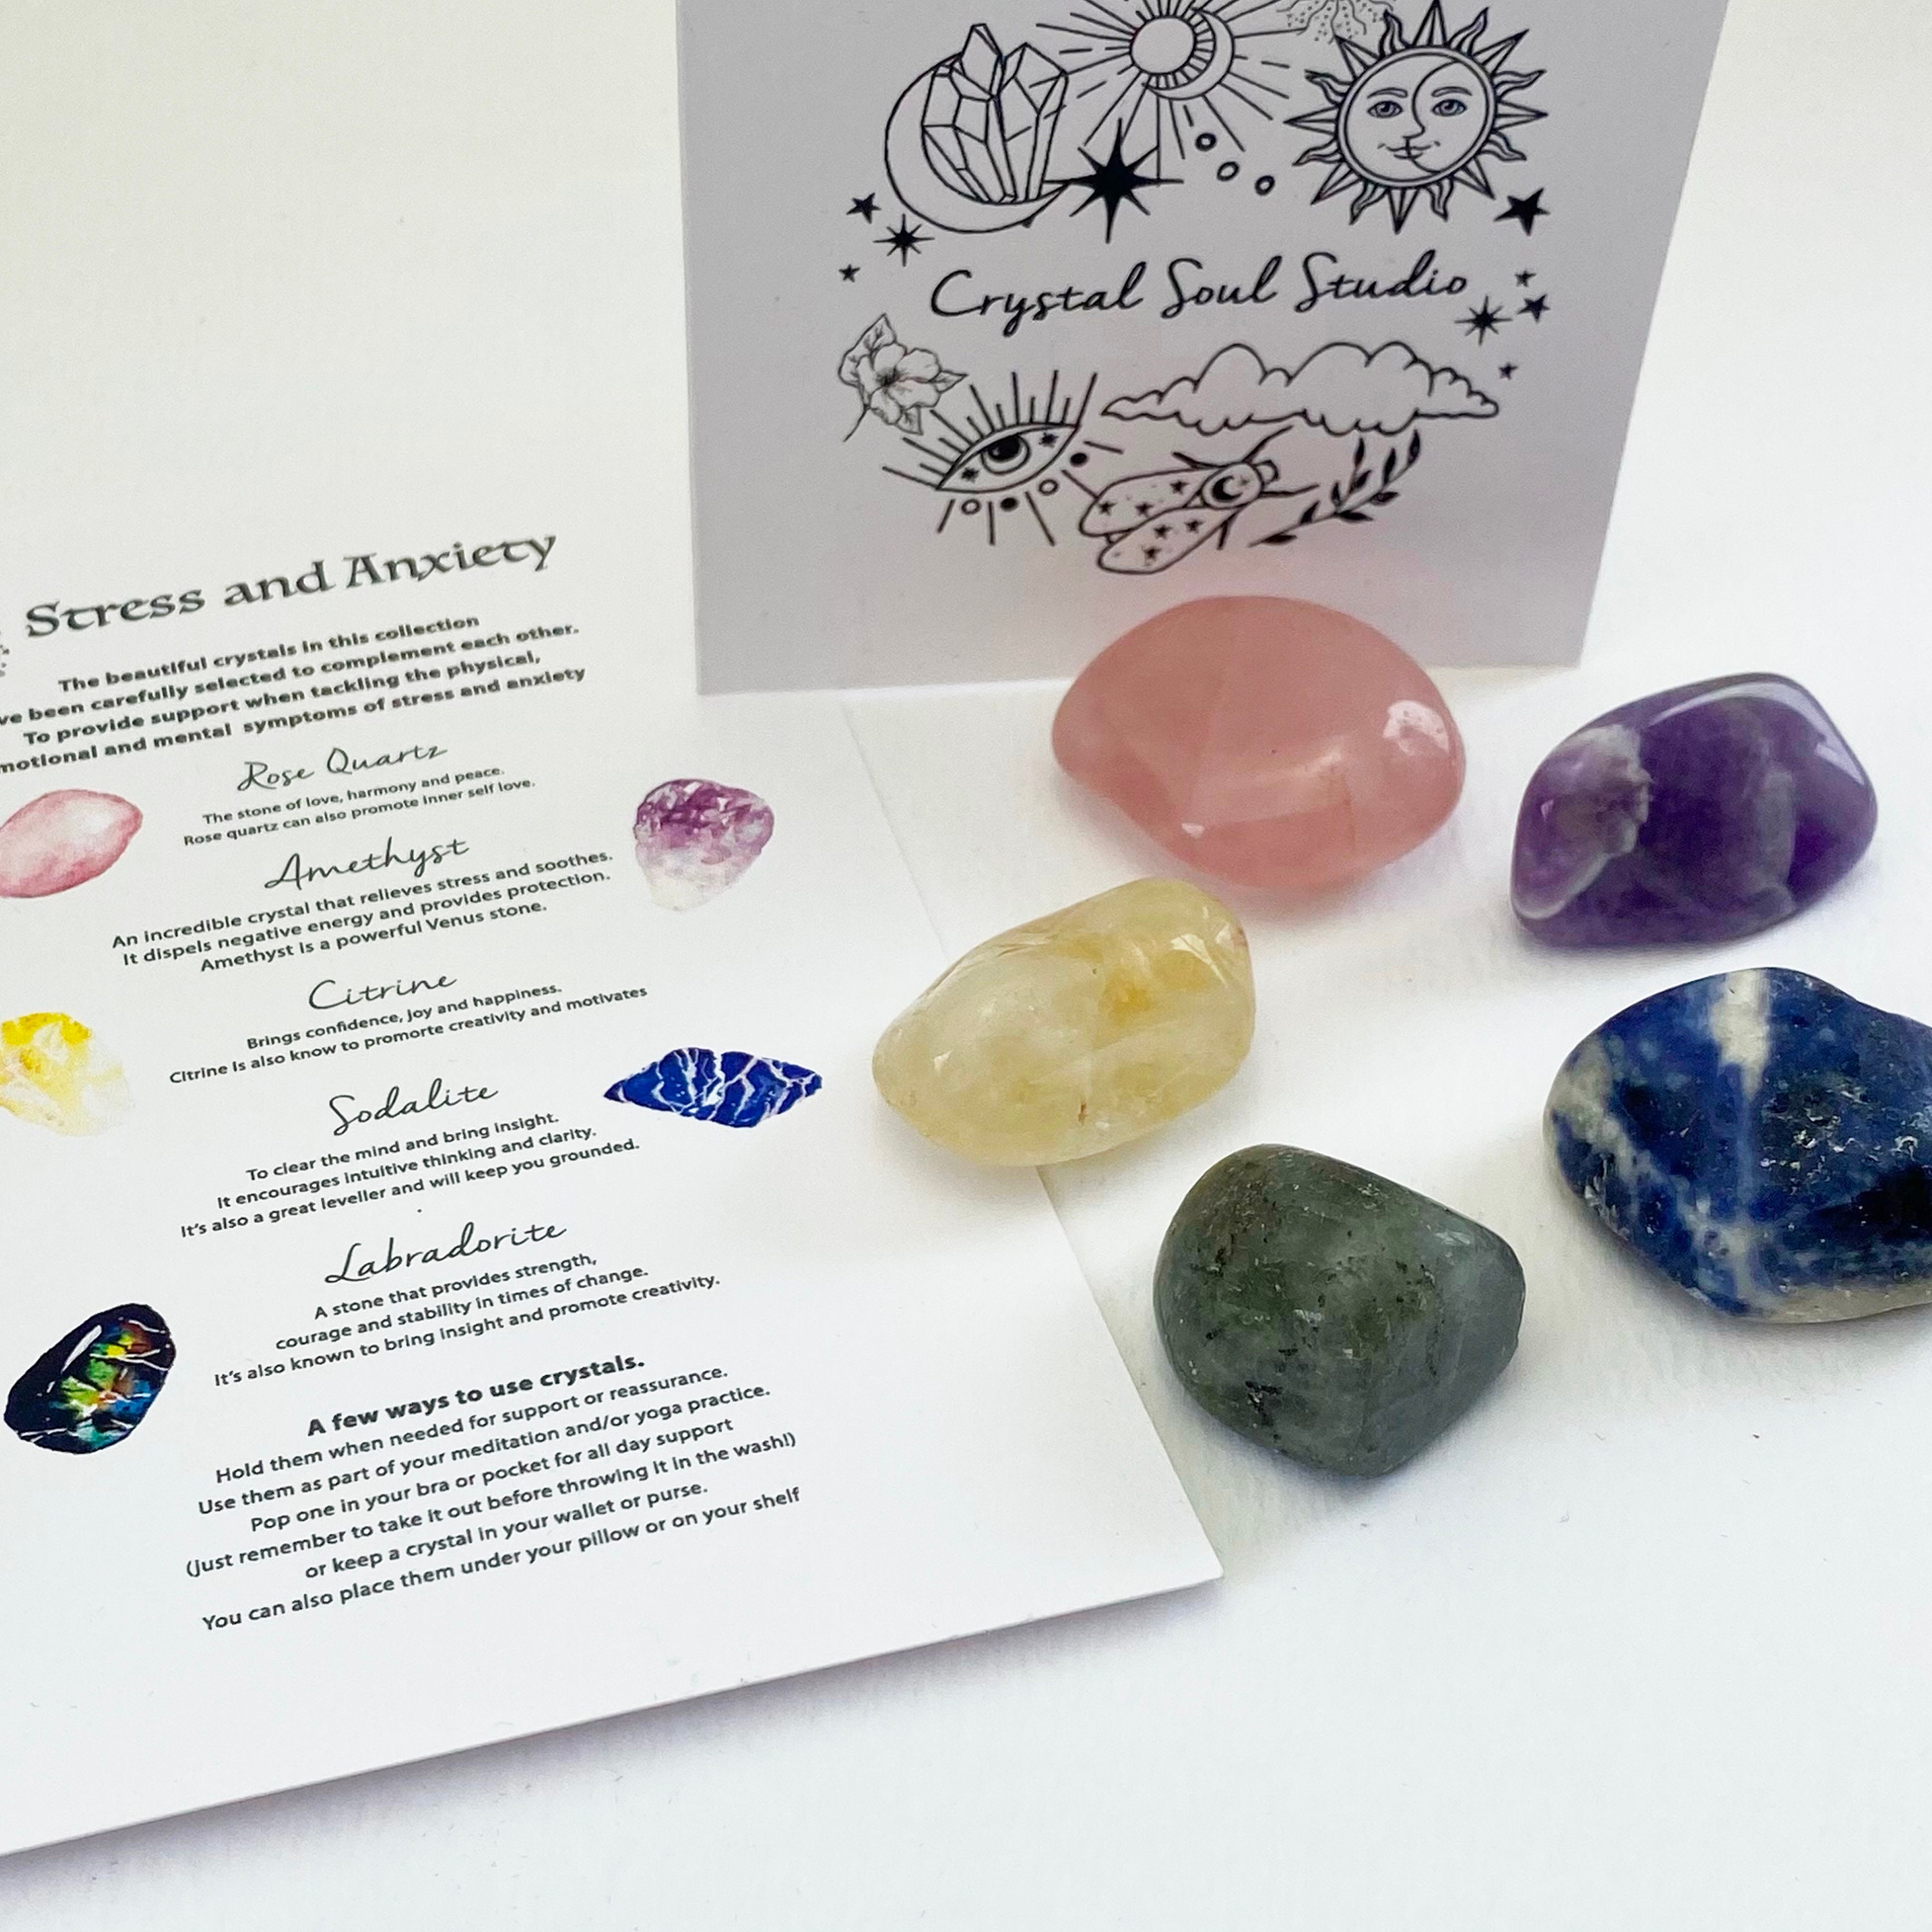 Crystals-Stones in your bra pouch “”